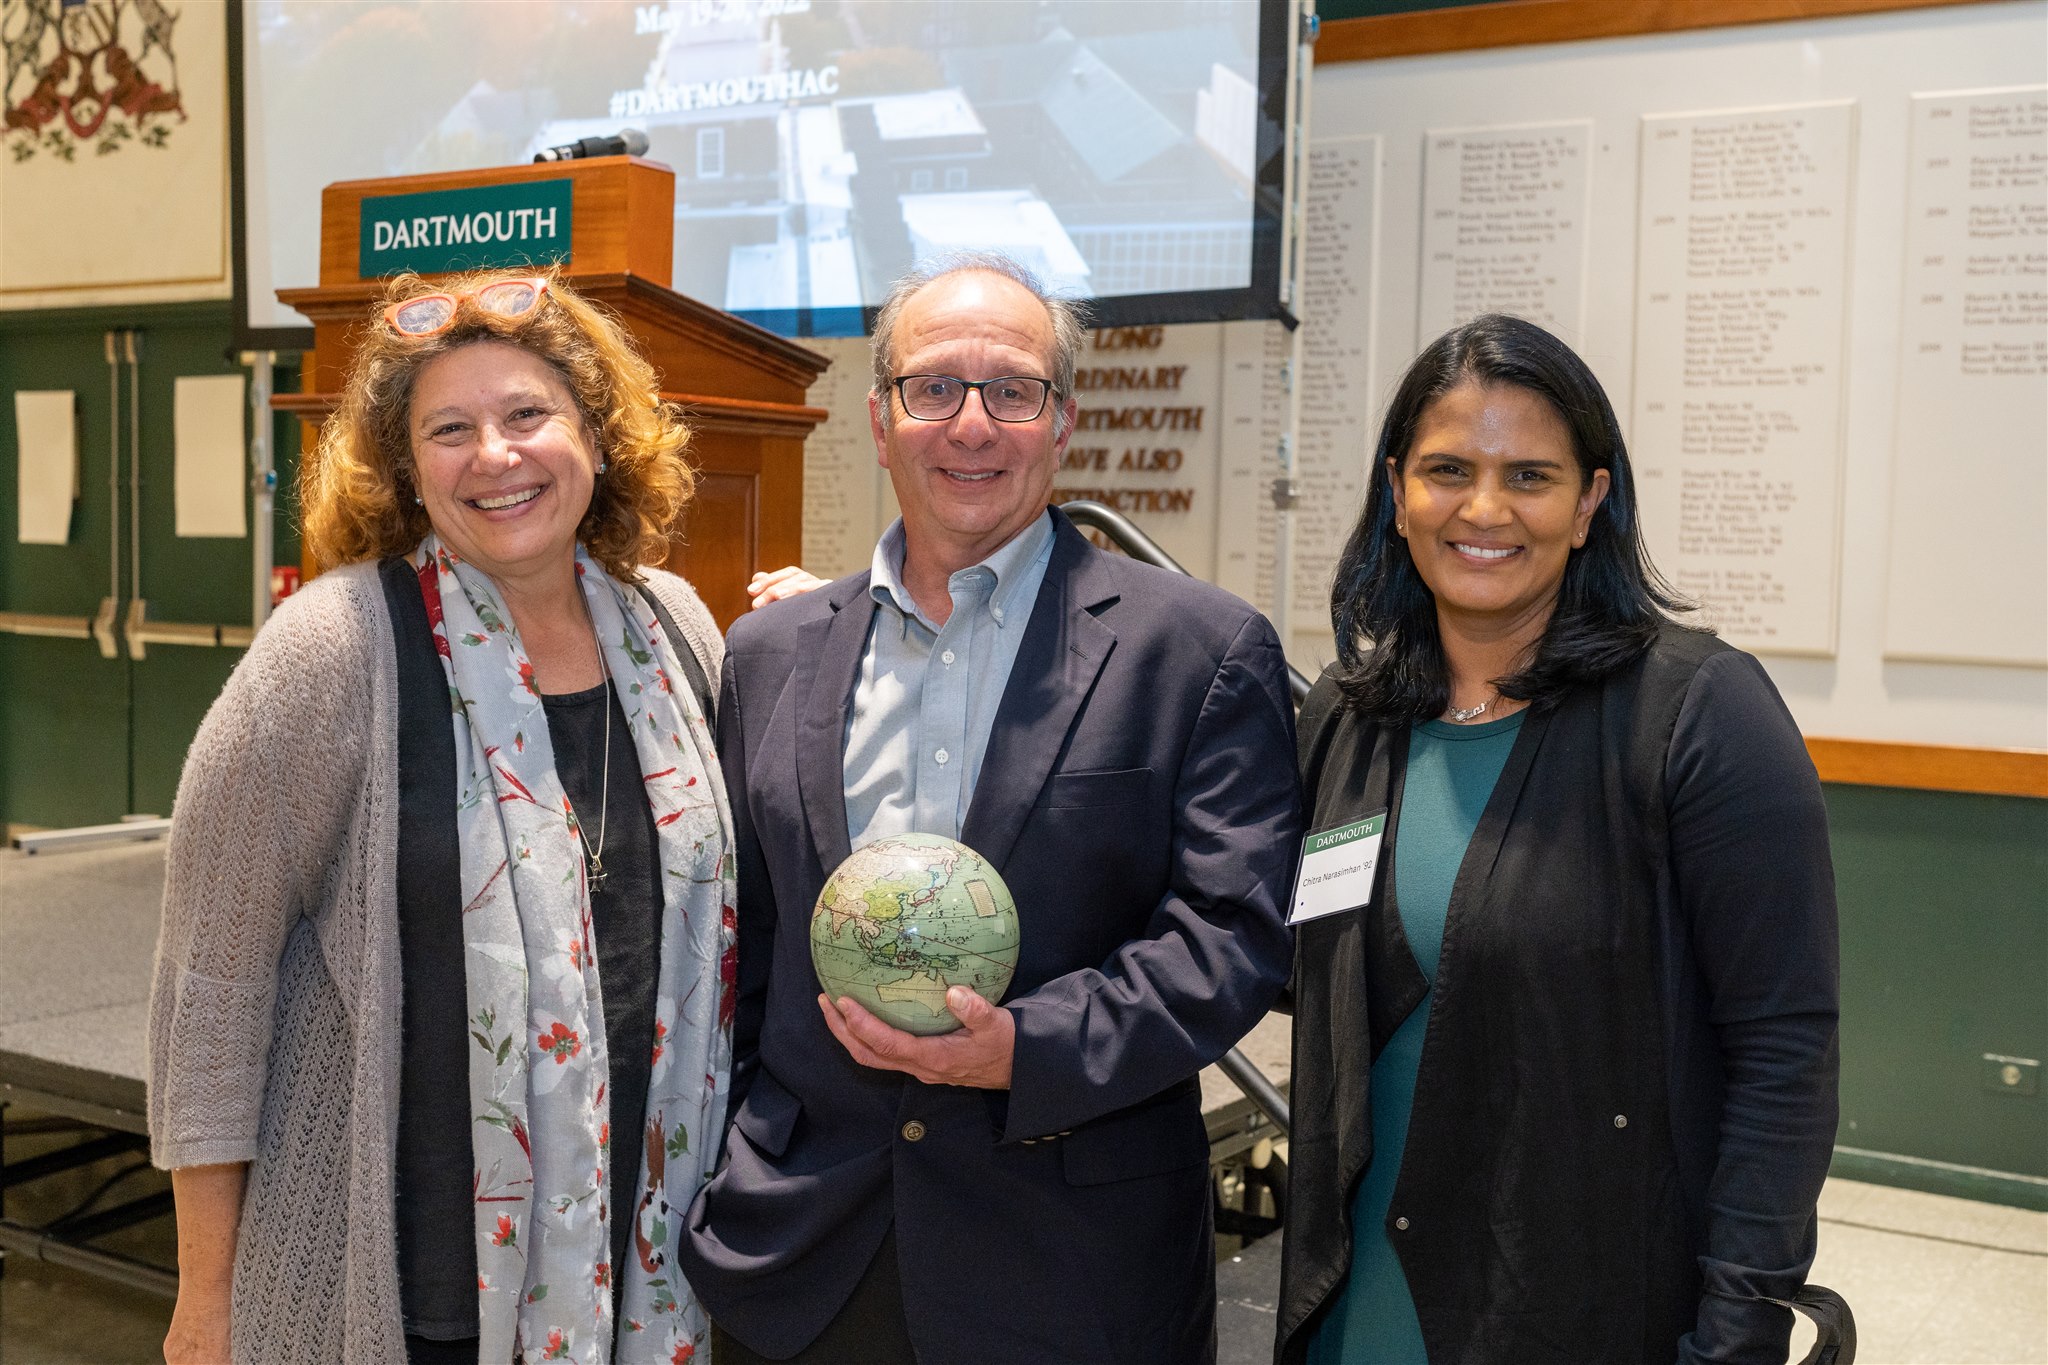 Helene Rassias-Miles ‘78a GR’08 (daughter of John Rassias), 2020 Award Recipient Michael Mastanduno, and Alumni Council President-elect and chair of the Lifelong Learning Committee Chitra Narasimhan ‘92